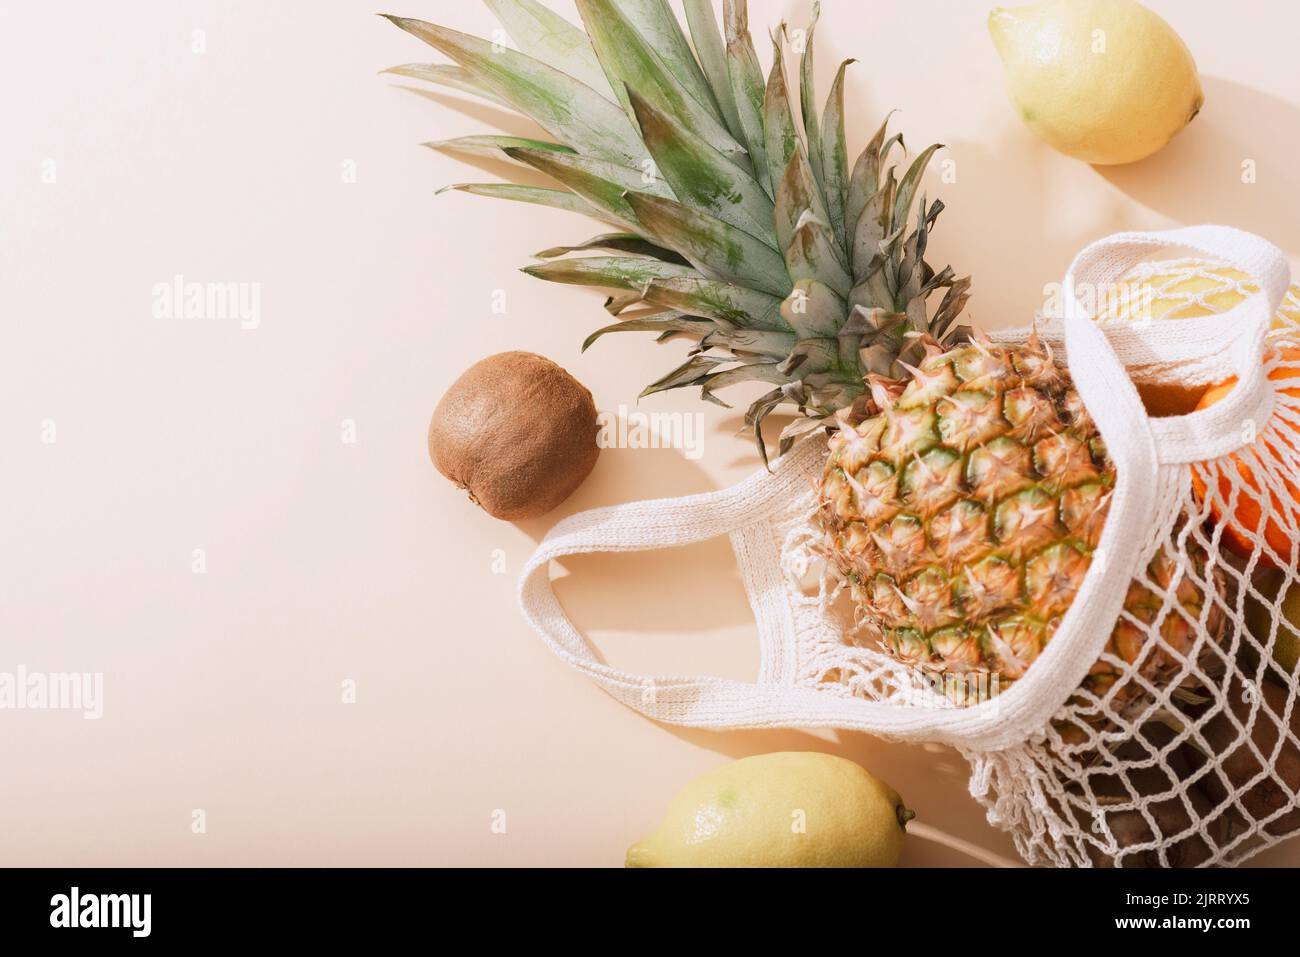 Different tropical fruits in mesh bag on beige background. Pineapple, kiwi, lemons and oranges. Top view, flat lay, copy space. Stock Photo